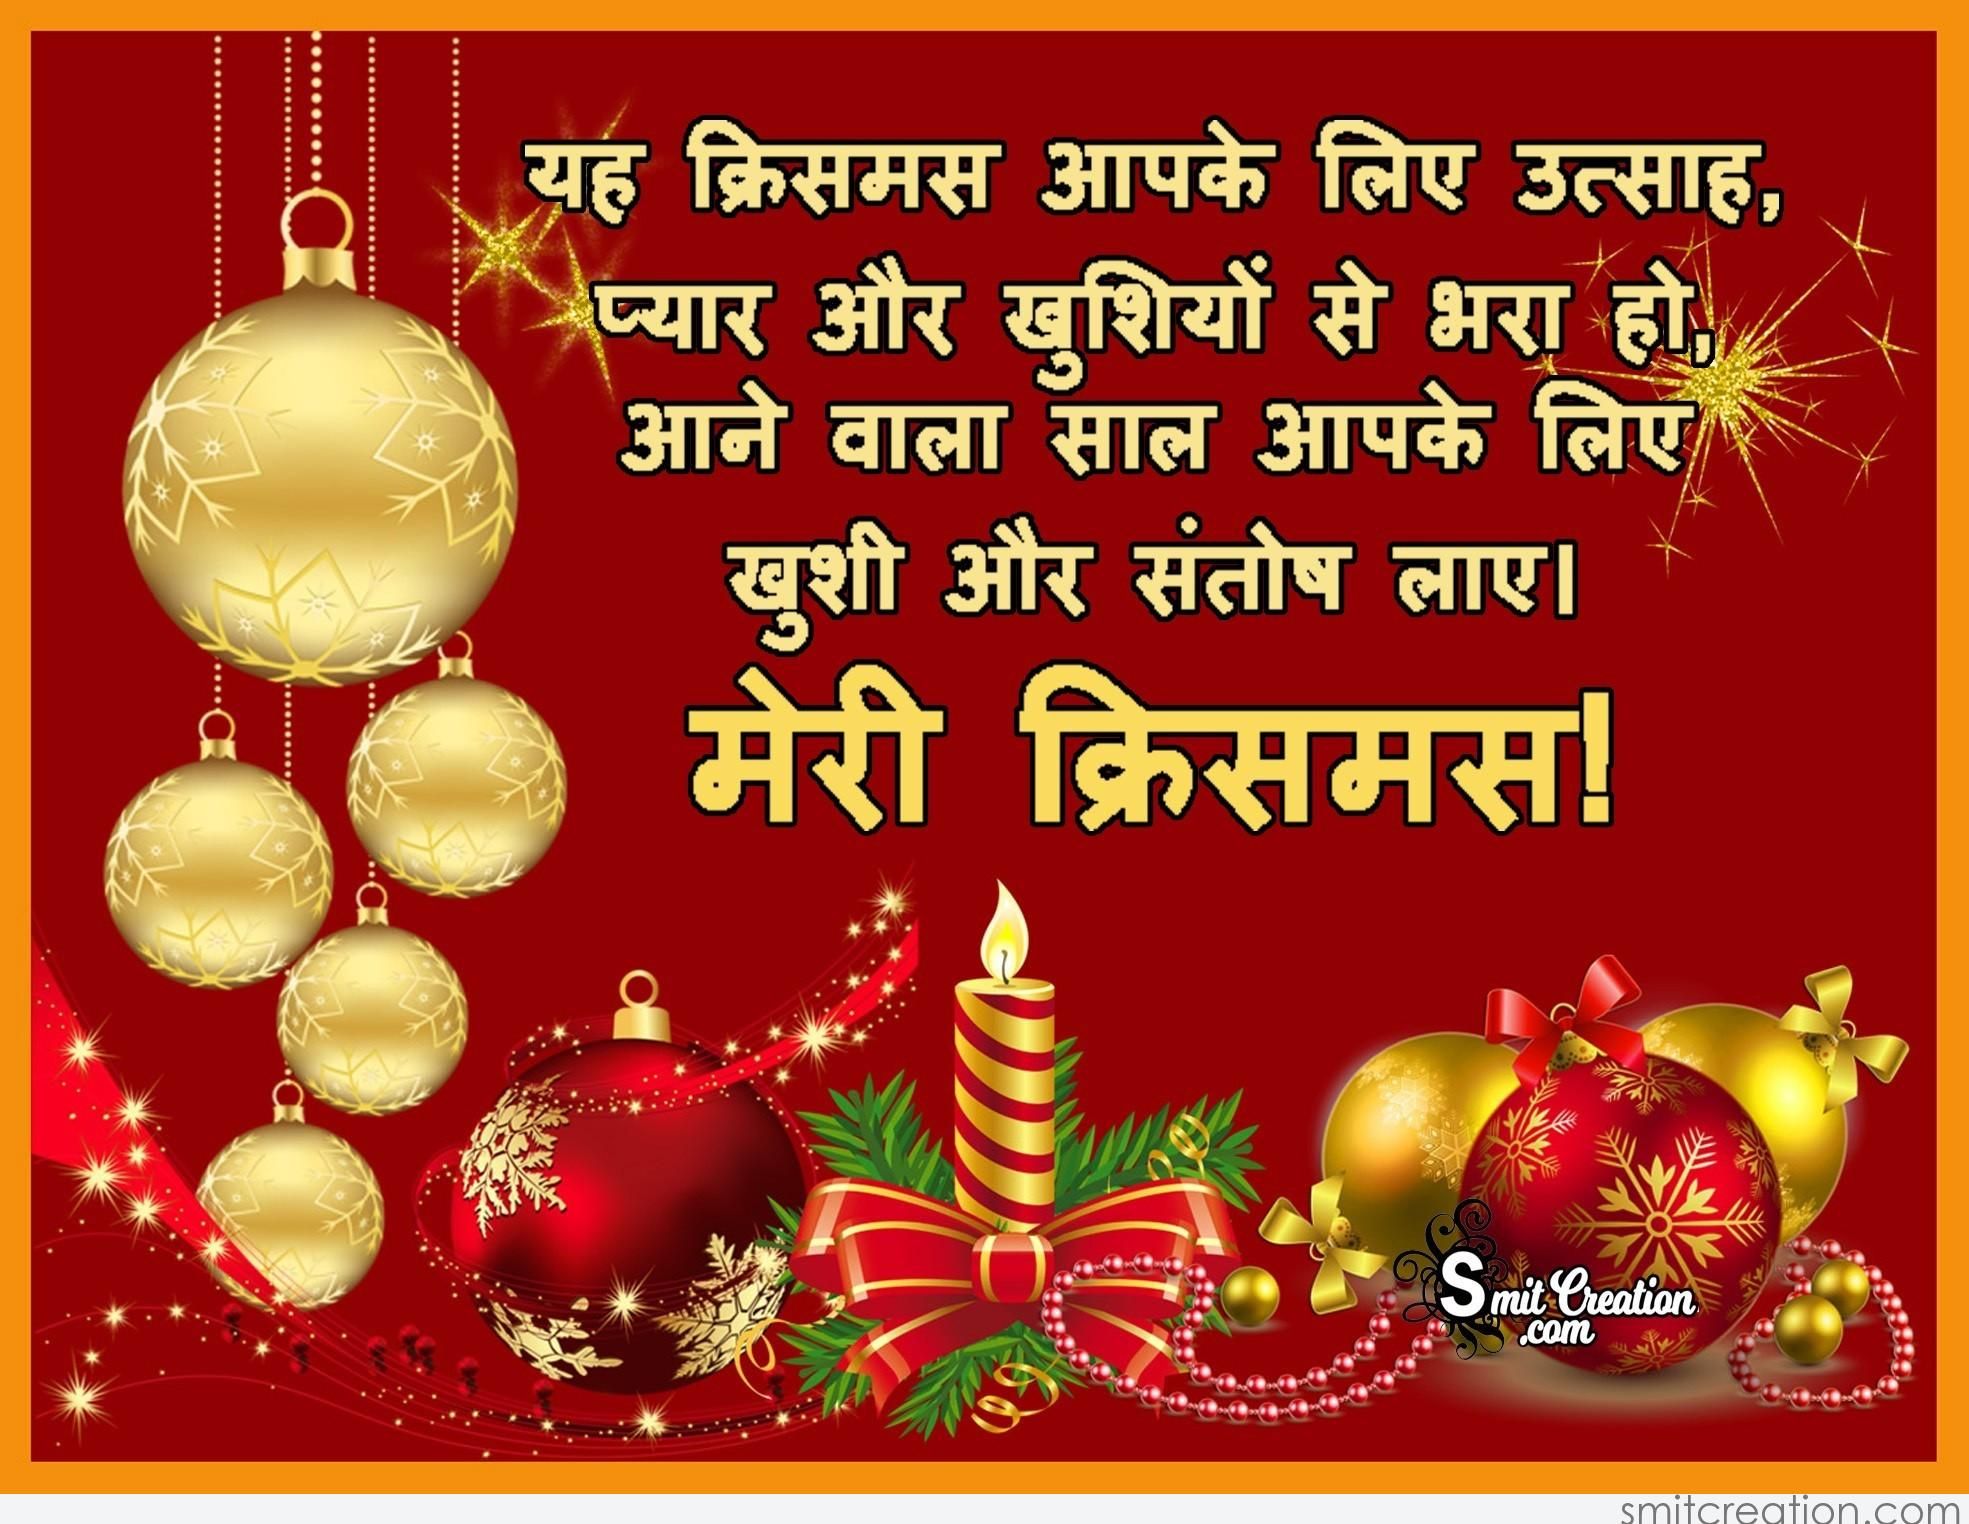 How To Say "Merry Christmas" In Hindi